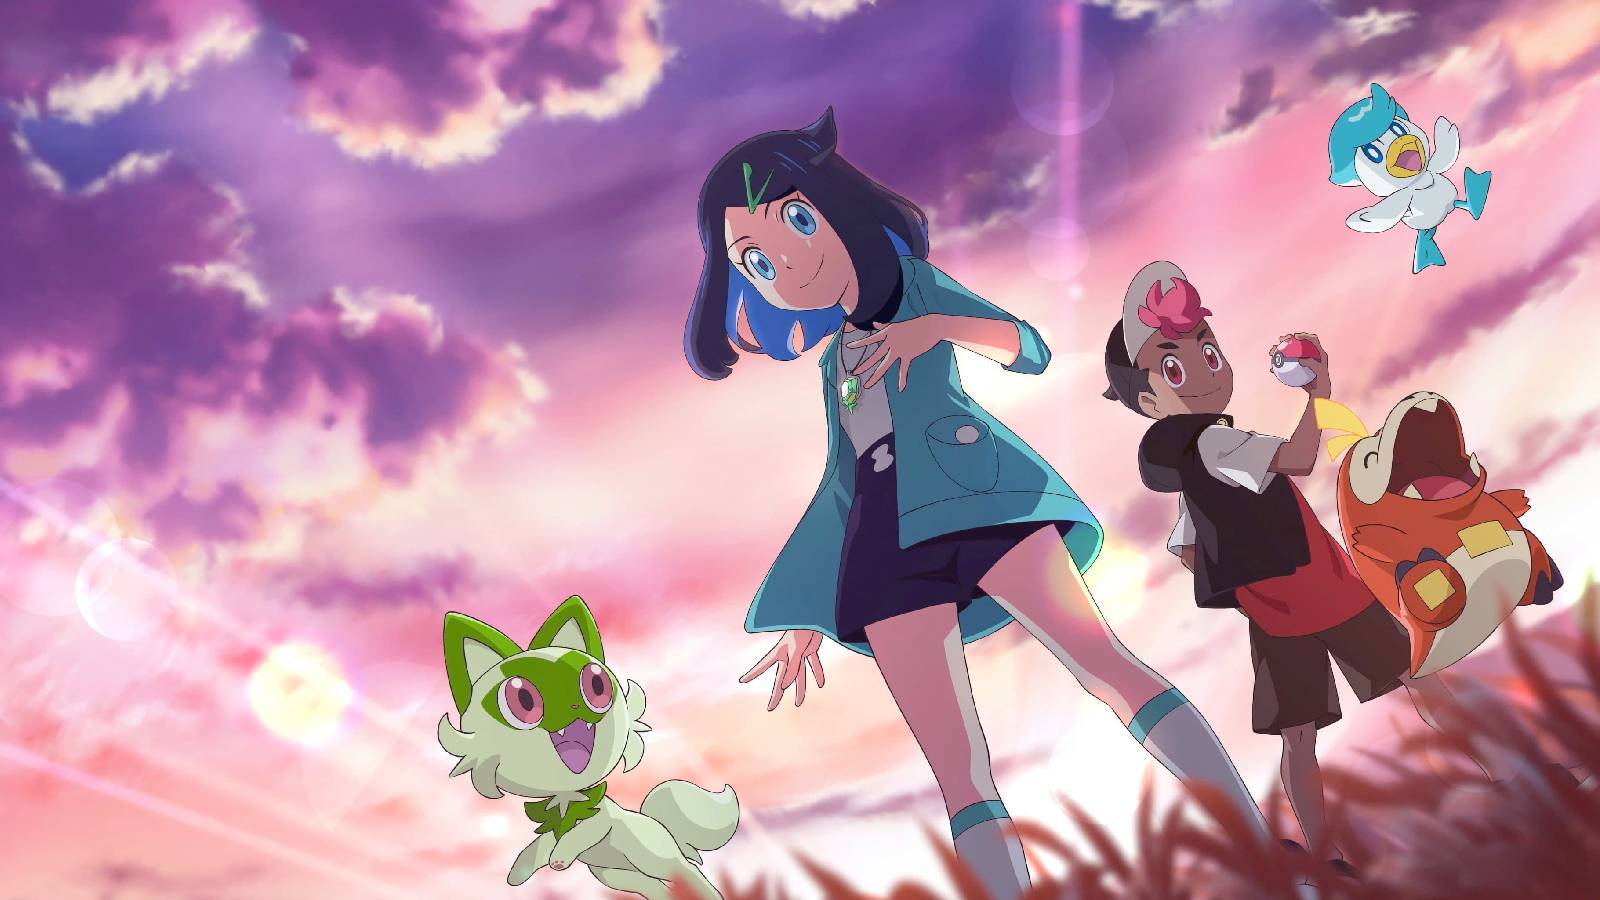 Key art for Pokemon Horizons shows the young girl Liko with her Pokemon Sprigatito, and a young boy called Roy with a Fuecoco and a Quaxly